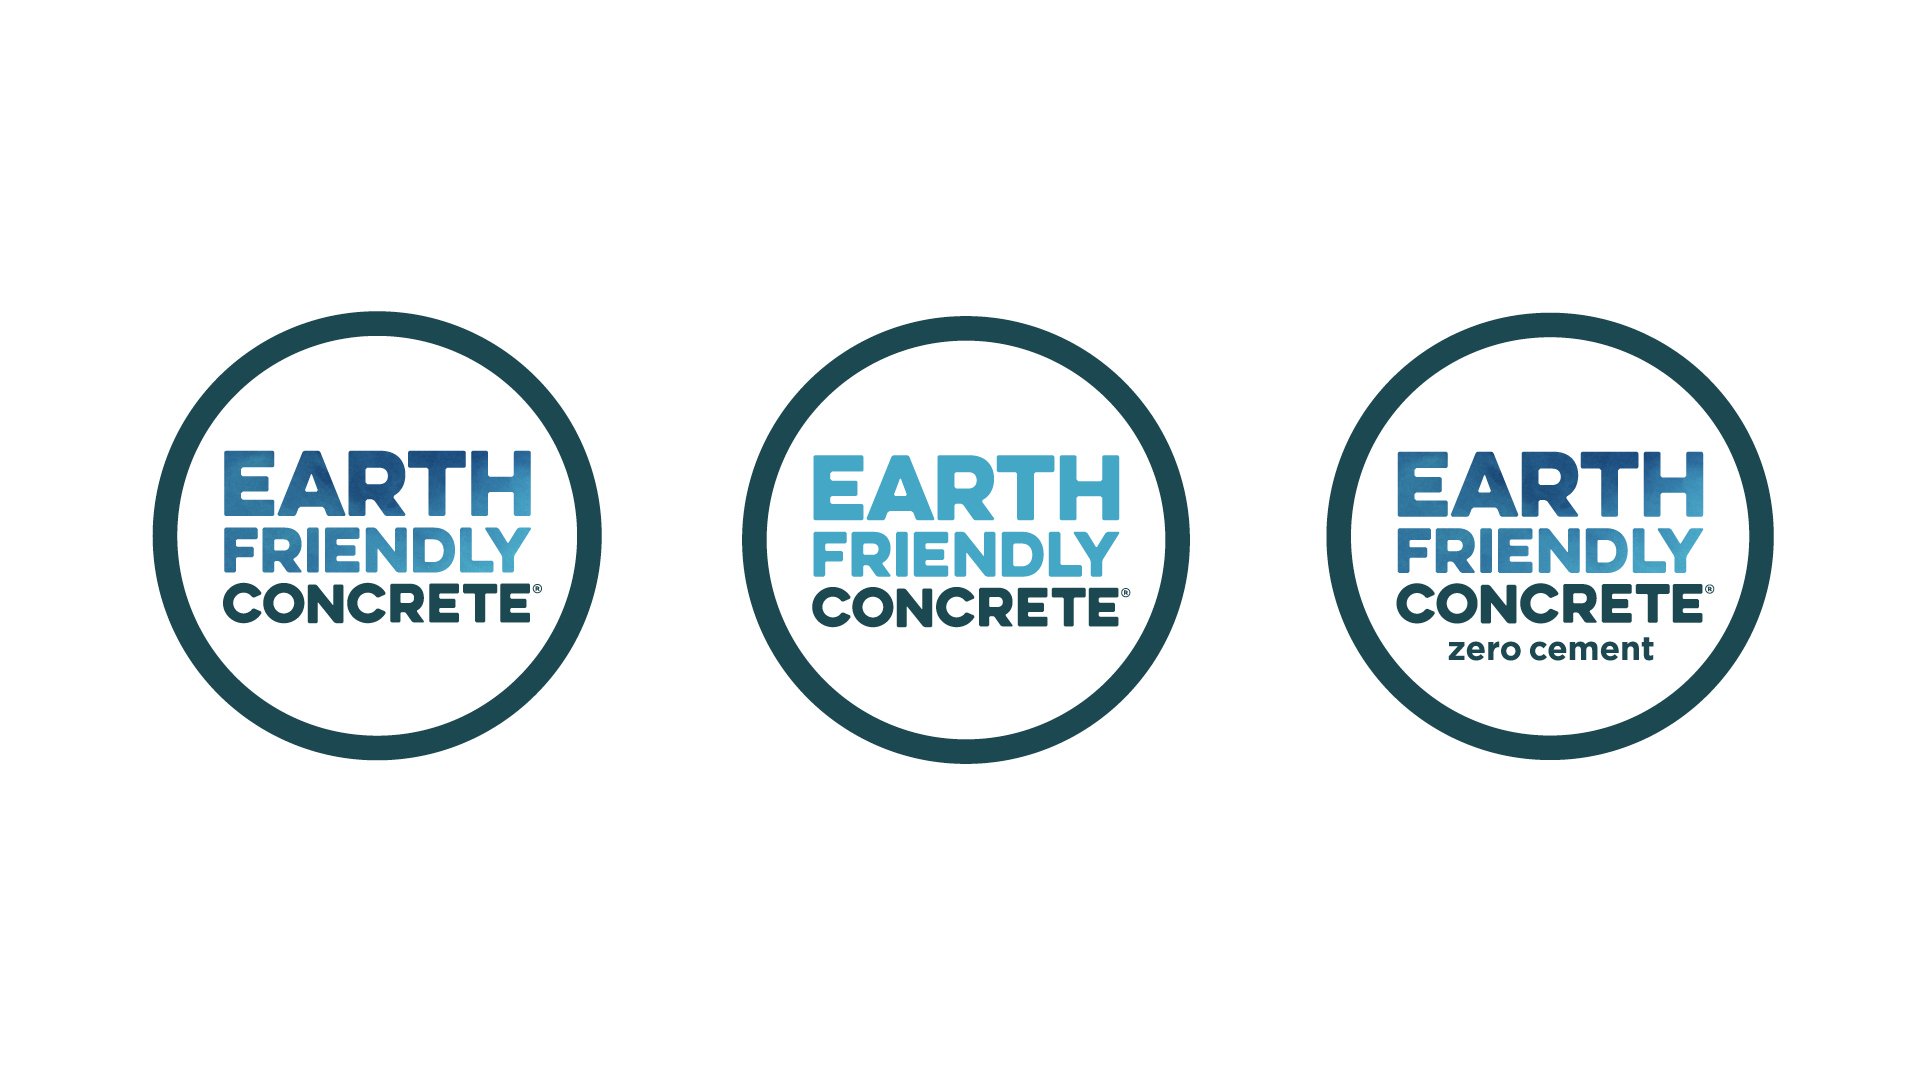 Earth Friendly Concrete Wagners Brand Case Study2.jpg